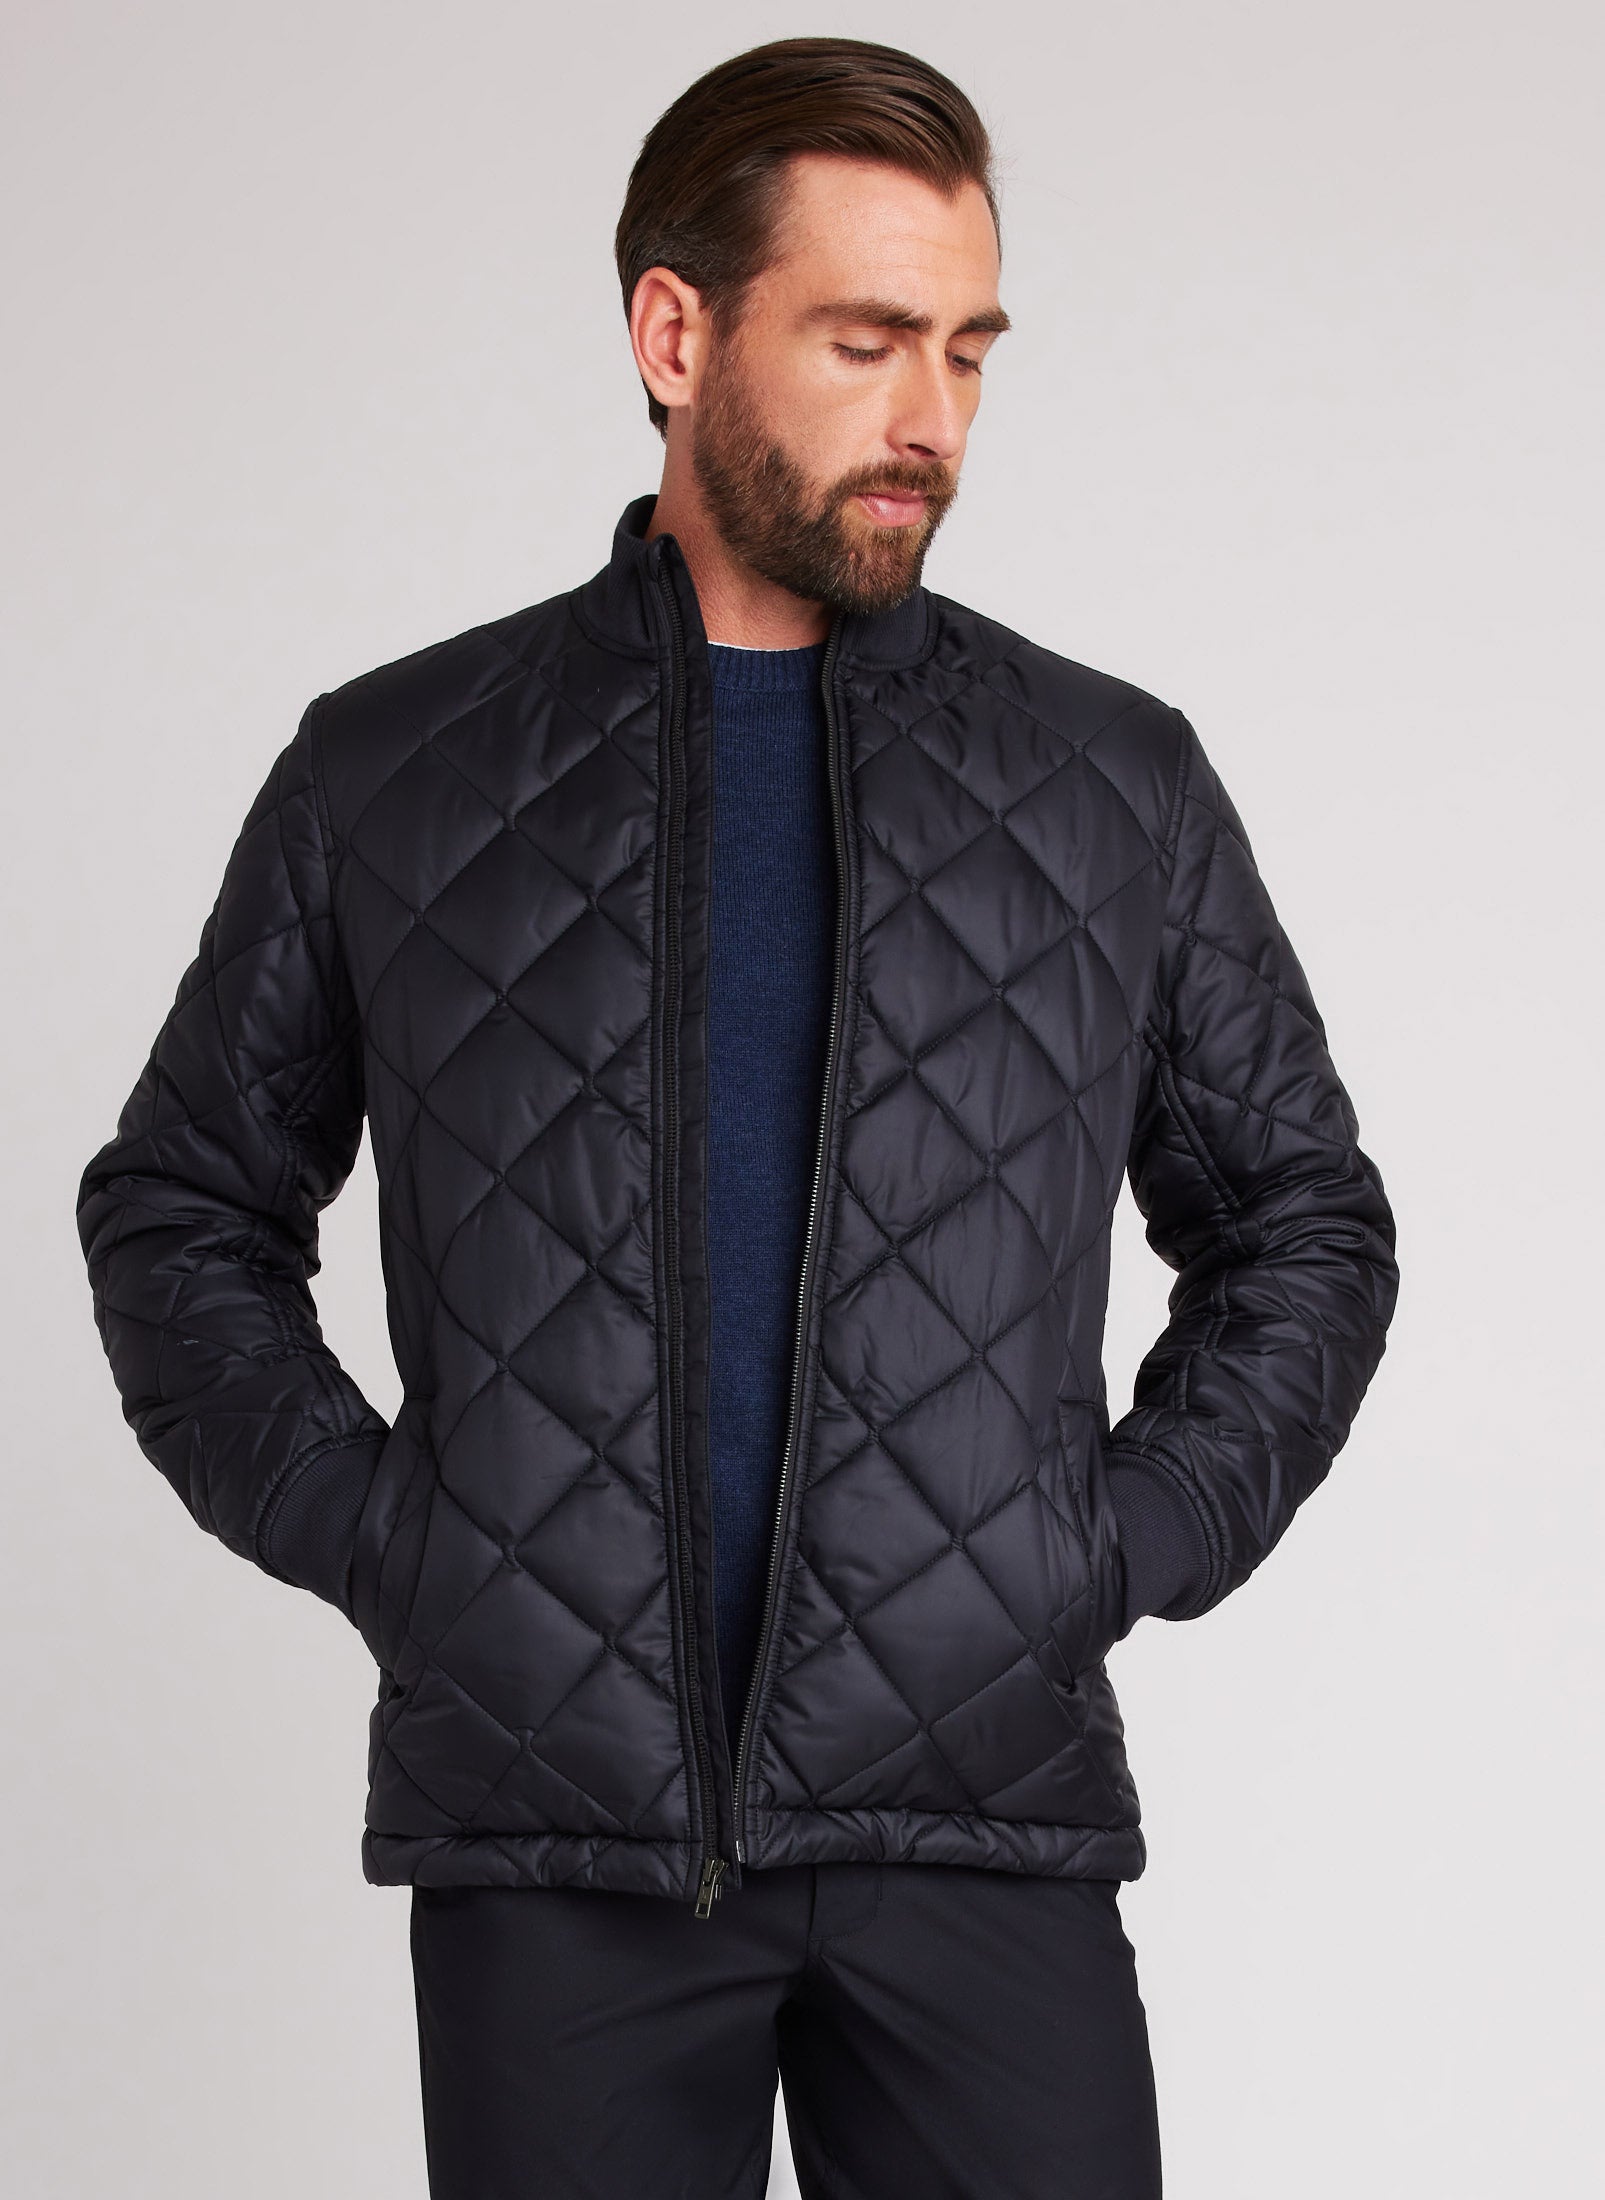 Every Day Diamond Quilted Jacket | Men's Jackets and Blazers – Kit